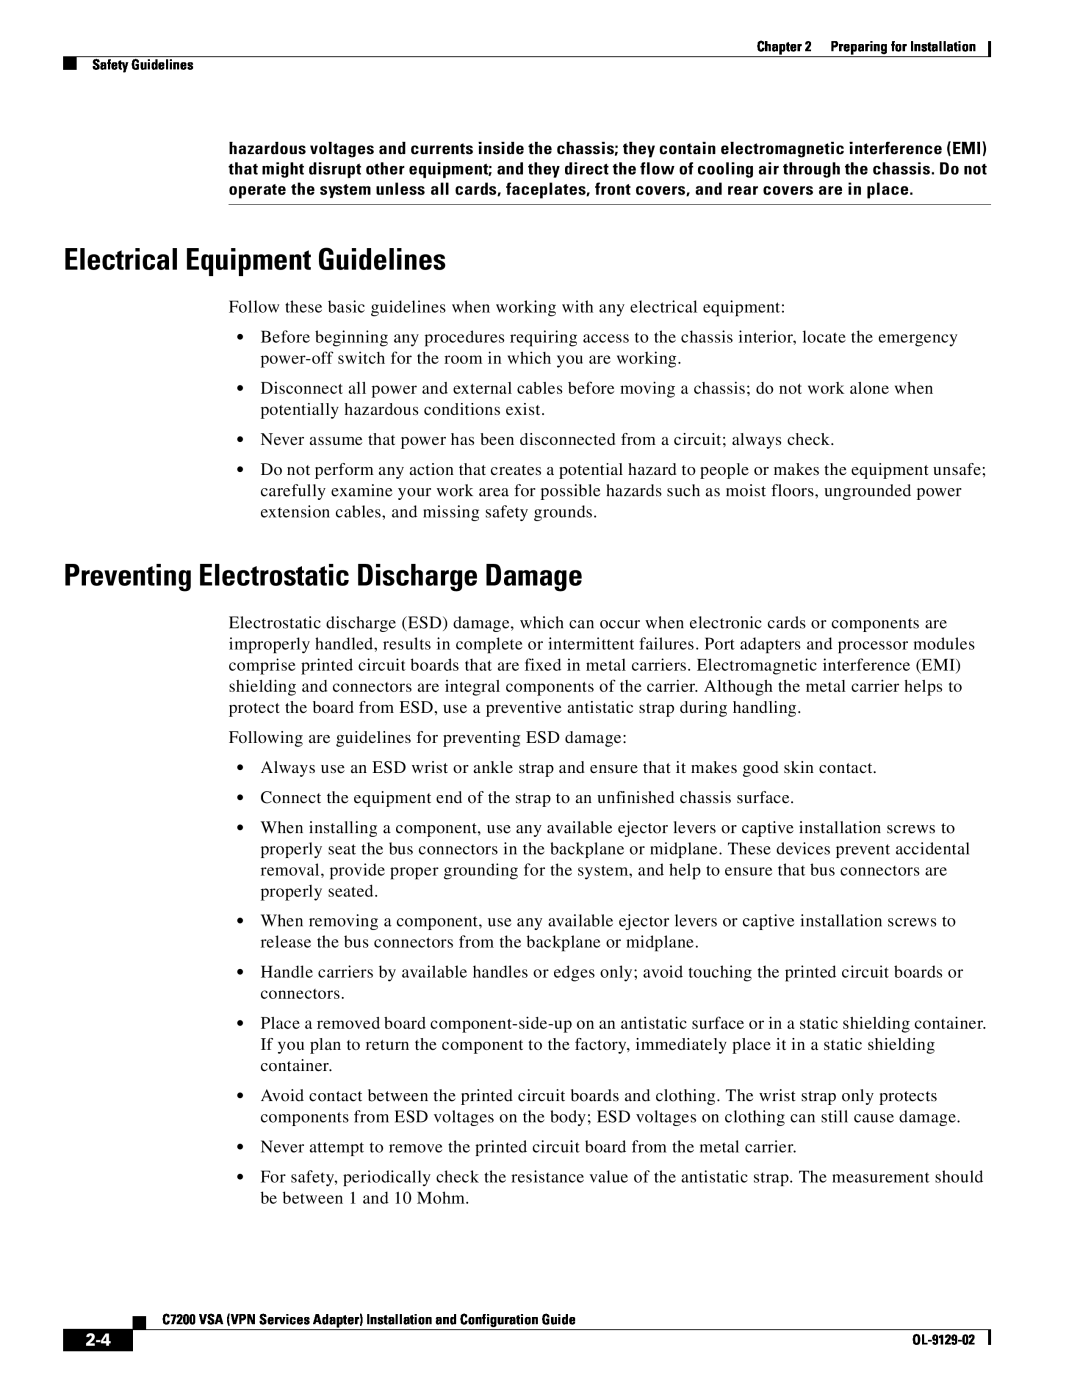 Cisco Systems C7200 manual Electrical Equipment Guidelines, Preventing Electrostatic Discharge Damage 